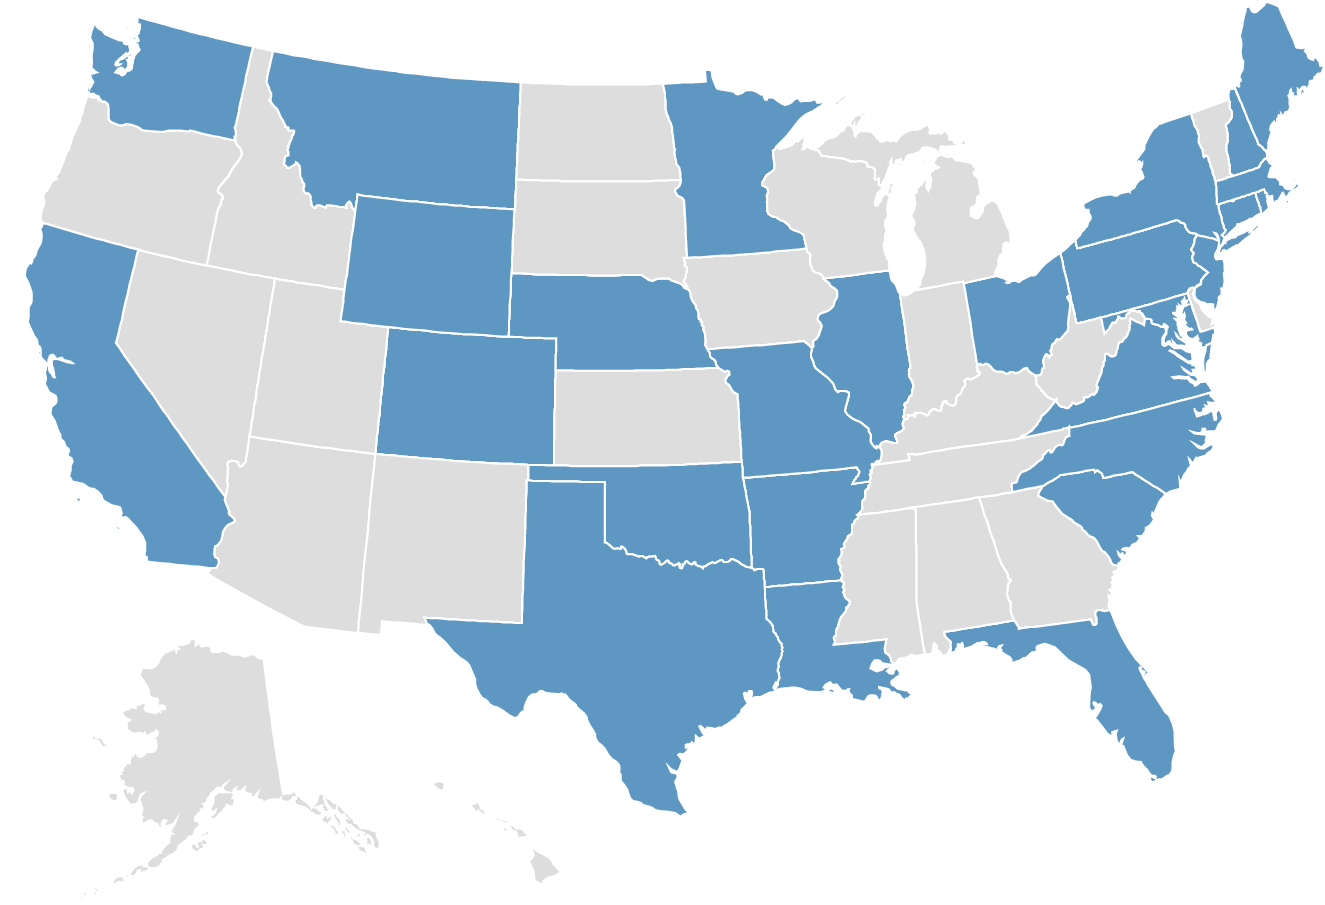 A map of the United States that has some states in grey and others in blue.